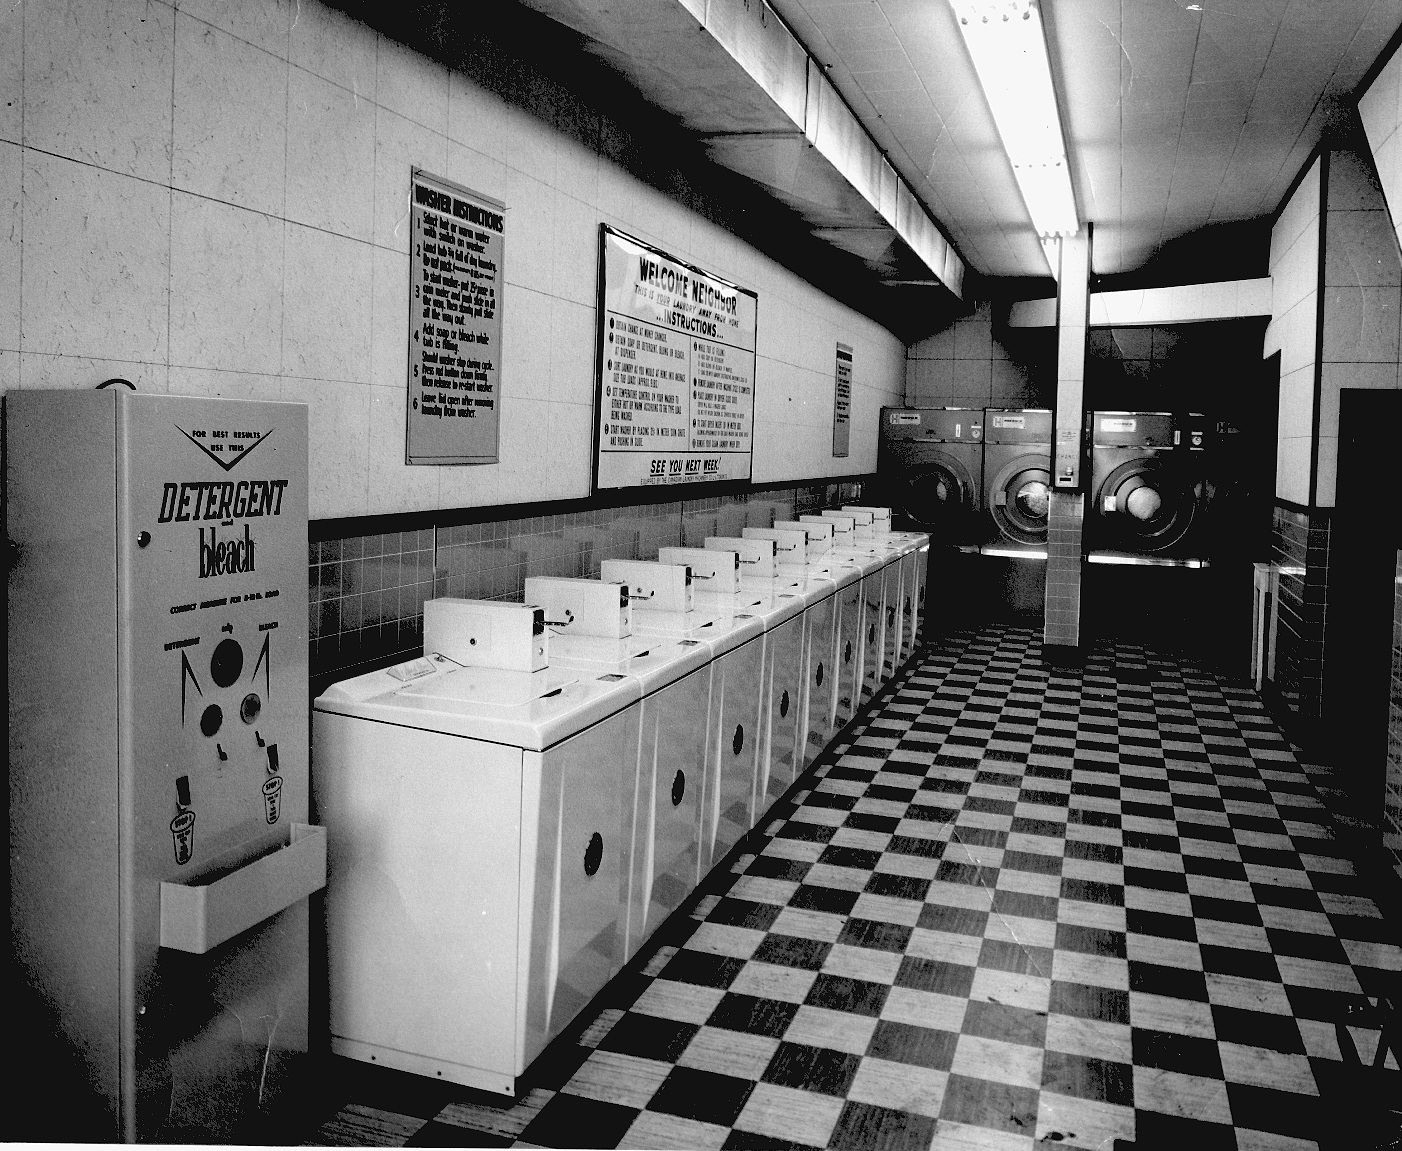 A row of ten washing machines and a laundry soap dispenser. Large clothes dryers on back wall.